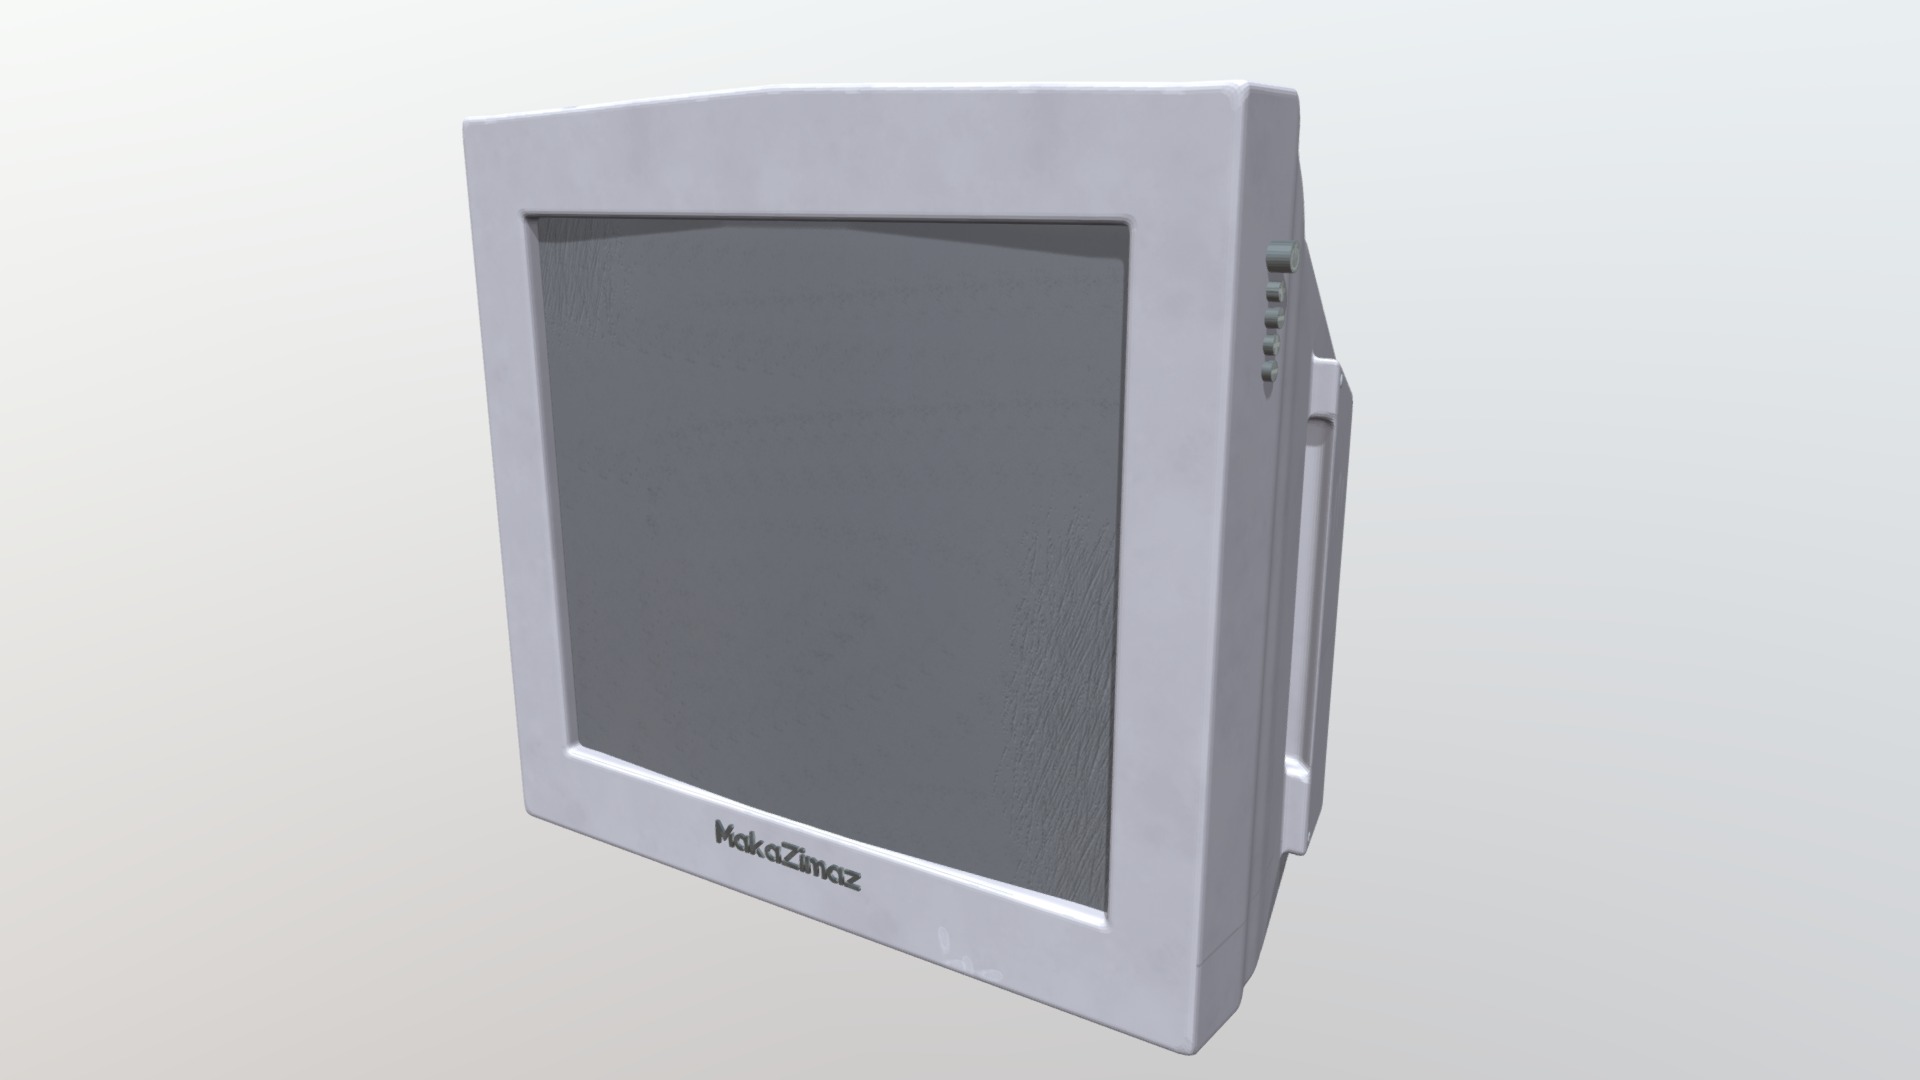 3D model Cathode Television - This is a 3D model of the Cathode Television. The 3D model is about a white rectangular device.